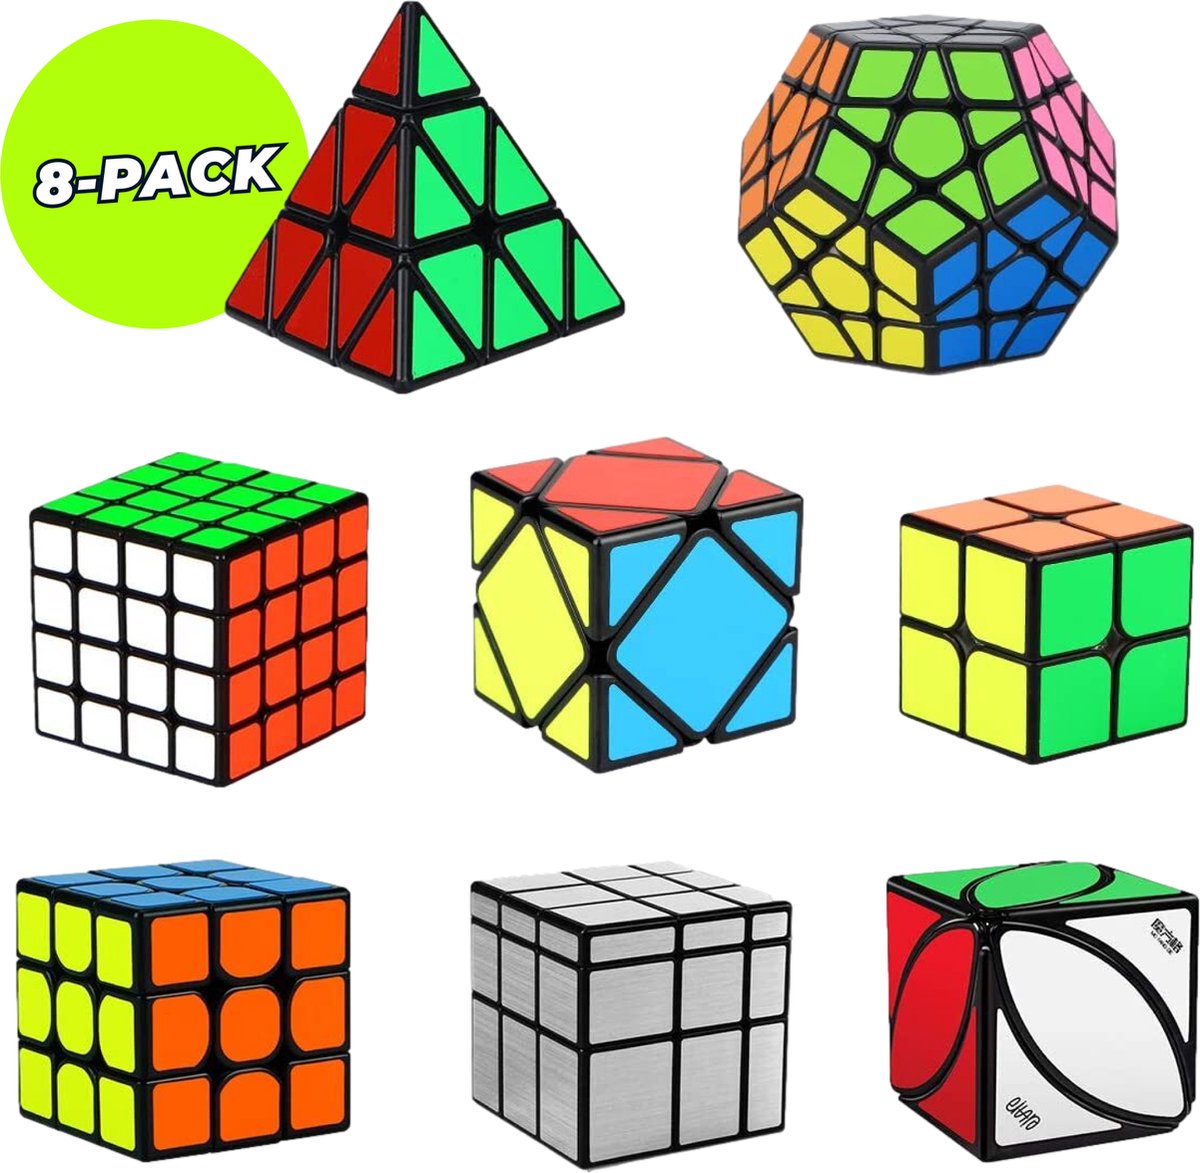 Speed Cube Set - Value Package Speed Cube - Casse-tête pour